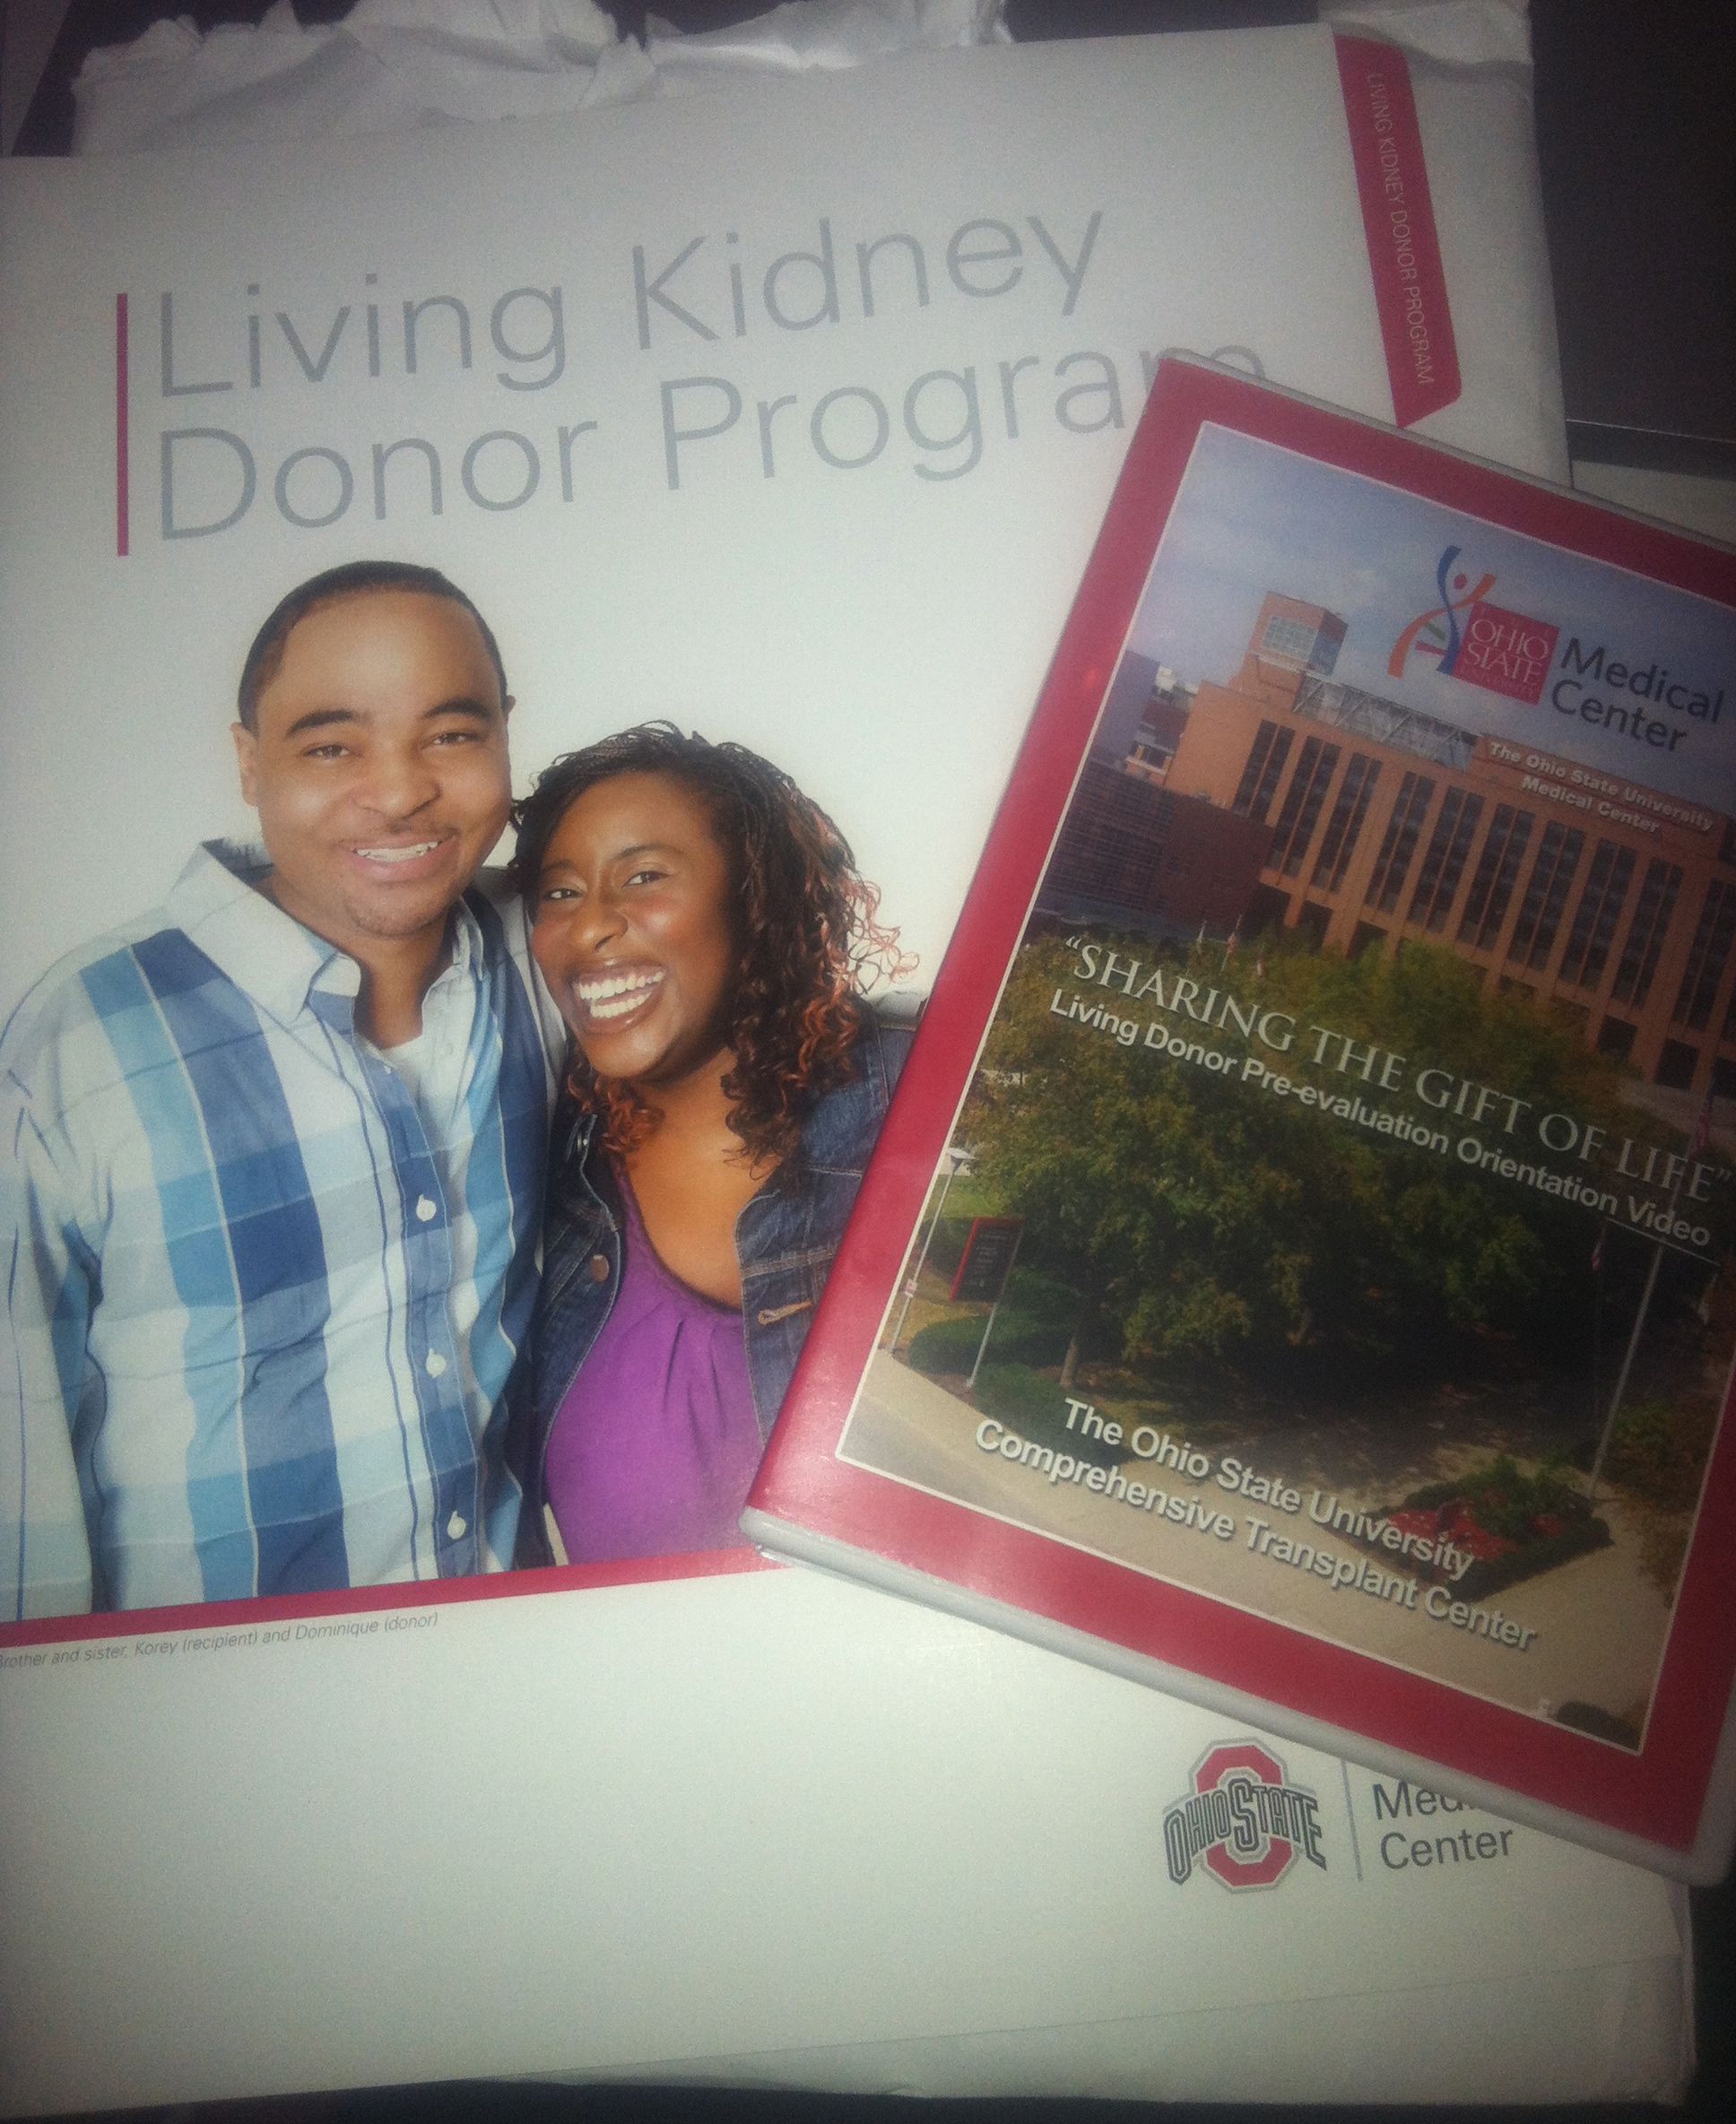 packet of information from OSU Wexner Medical Center about kidney donation